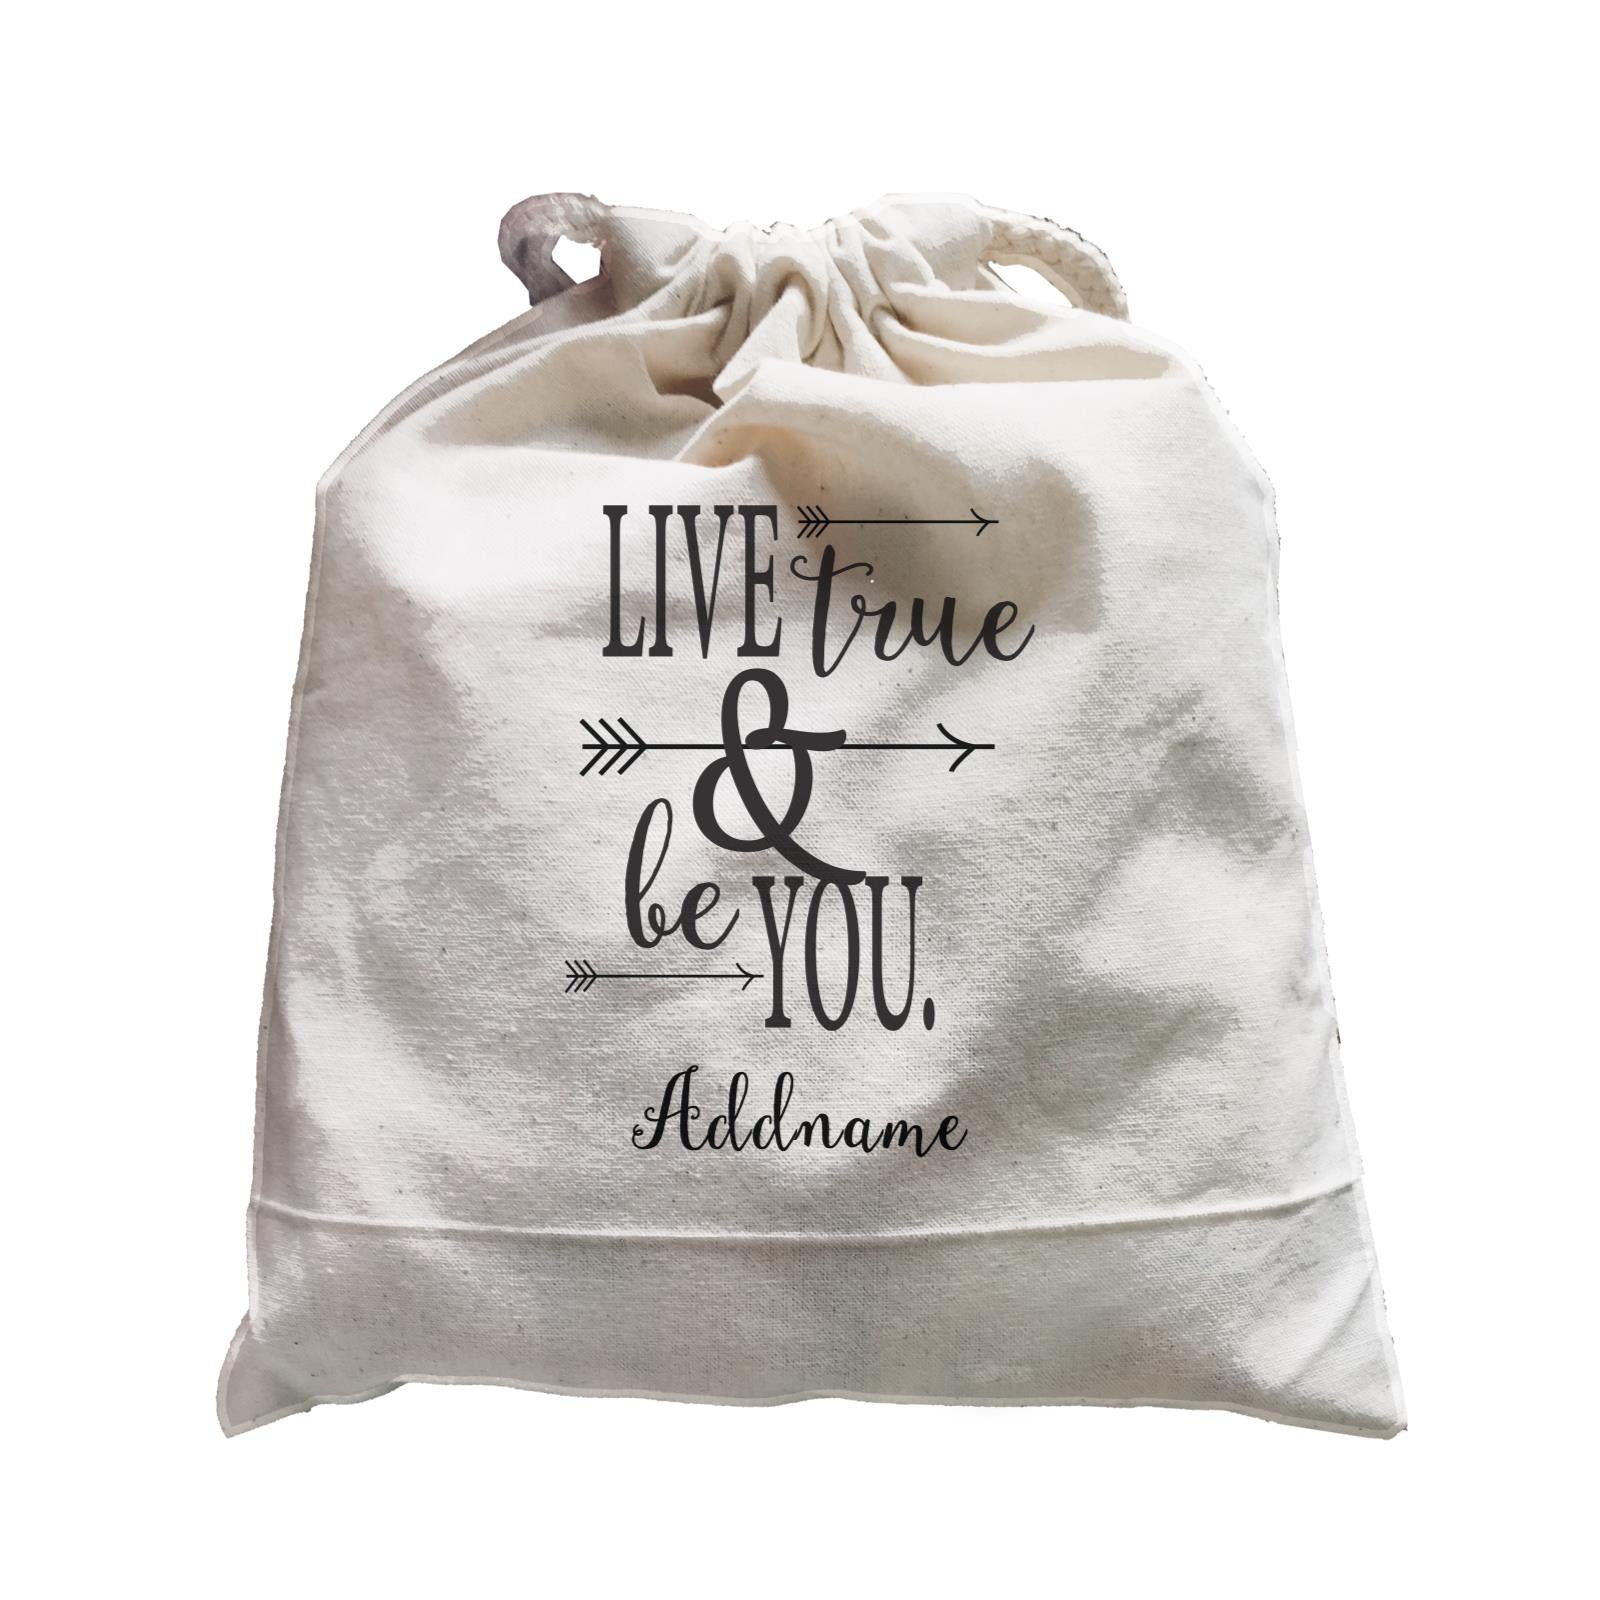 Inspiration Quotes Live True And Be You Addname Satchel